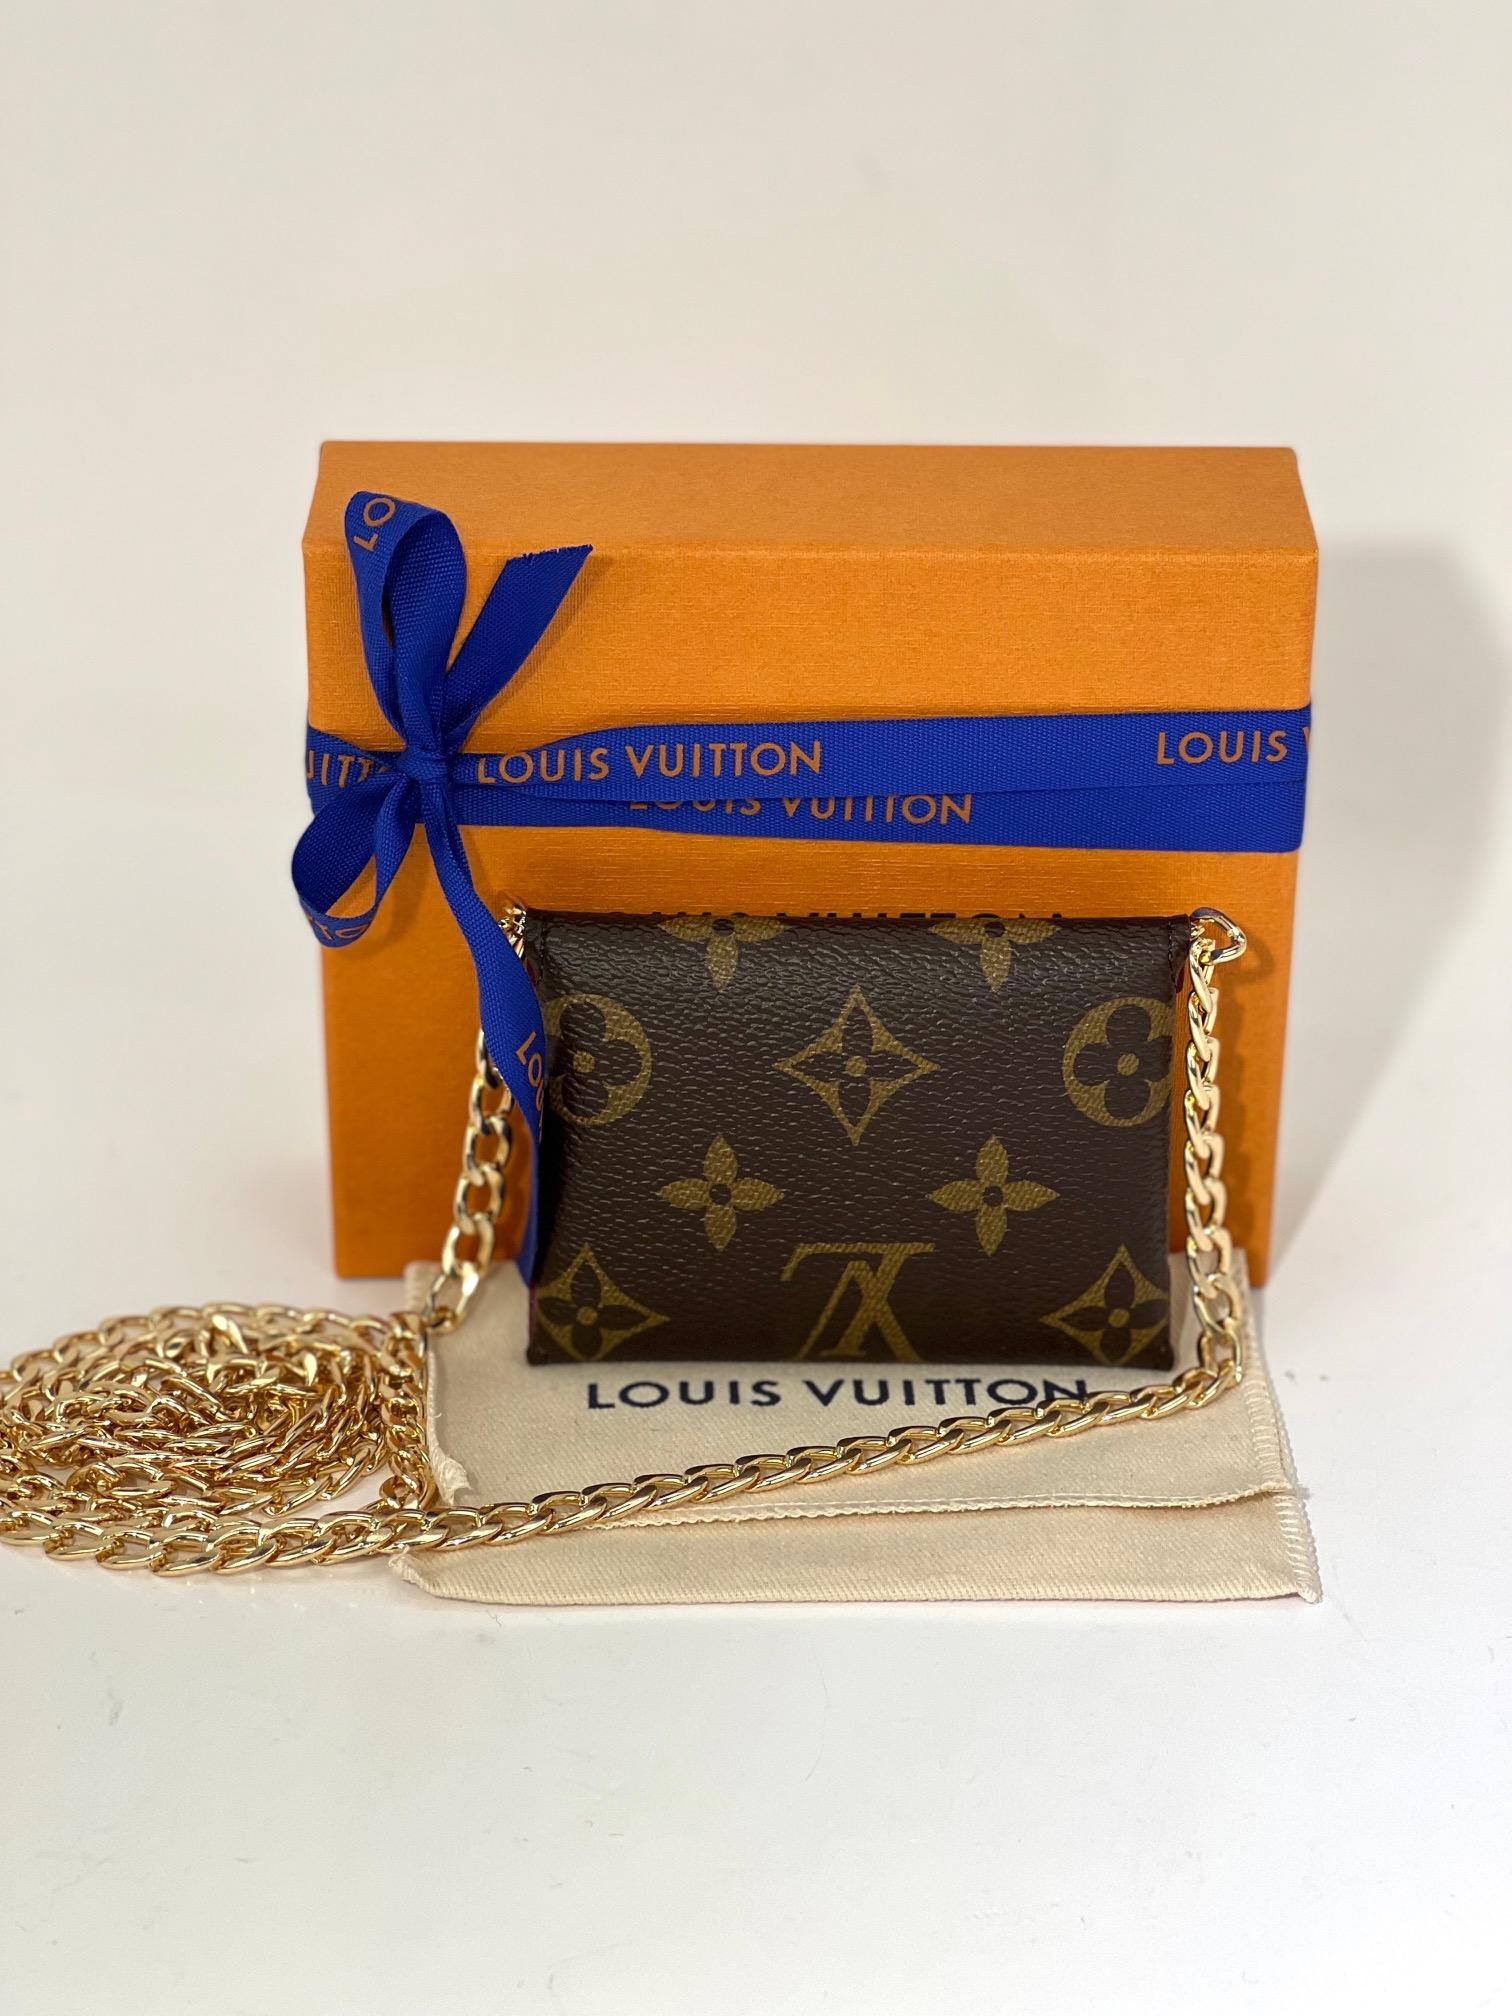 Preowned BUT like New 100% Authentic
LOUIS VUITTON Kirigami Pochette Burgundy Small
W/Added Non LV Insert & Chain to make a Crossbody
or Necklace
RATING: A+...Excellent, near mint
MATERIAL: Monogram canvas
STRAP: Non LV Golden Strap 47''